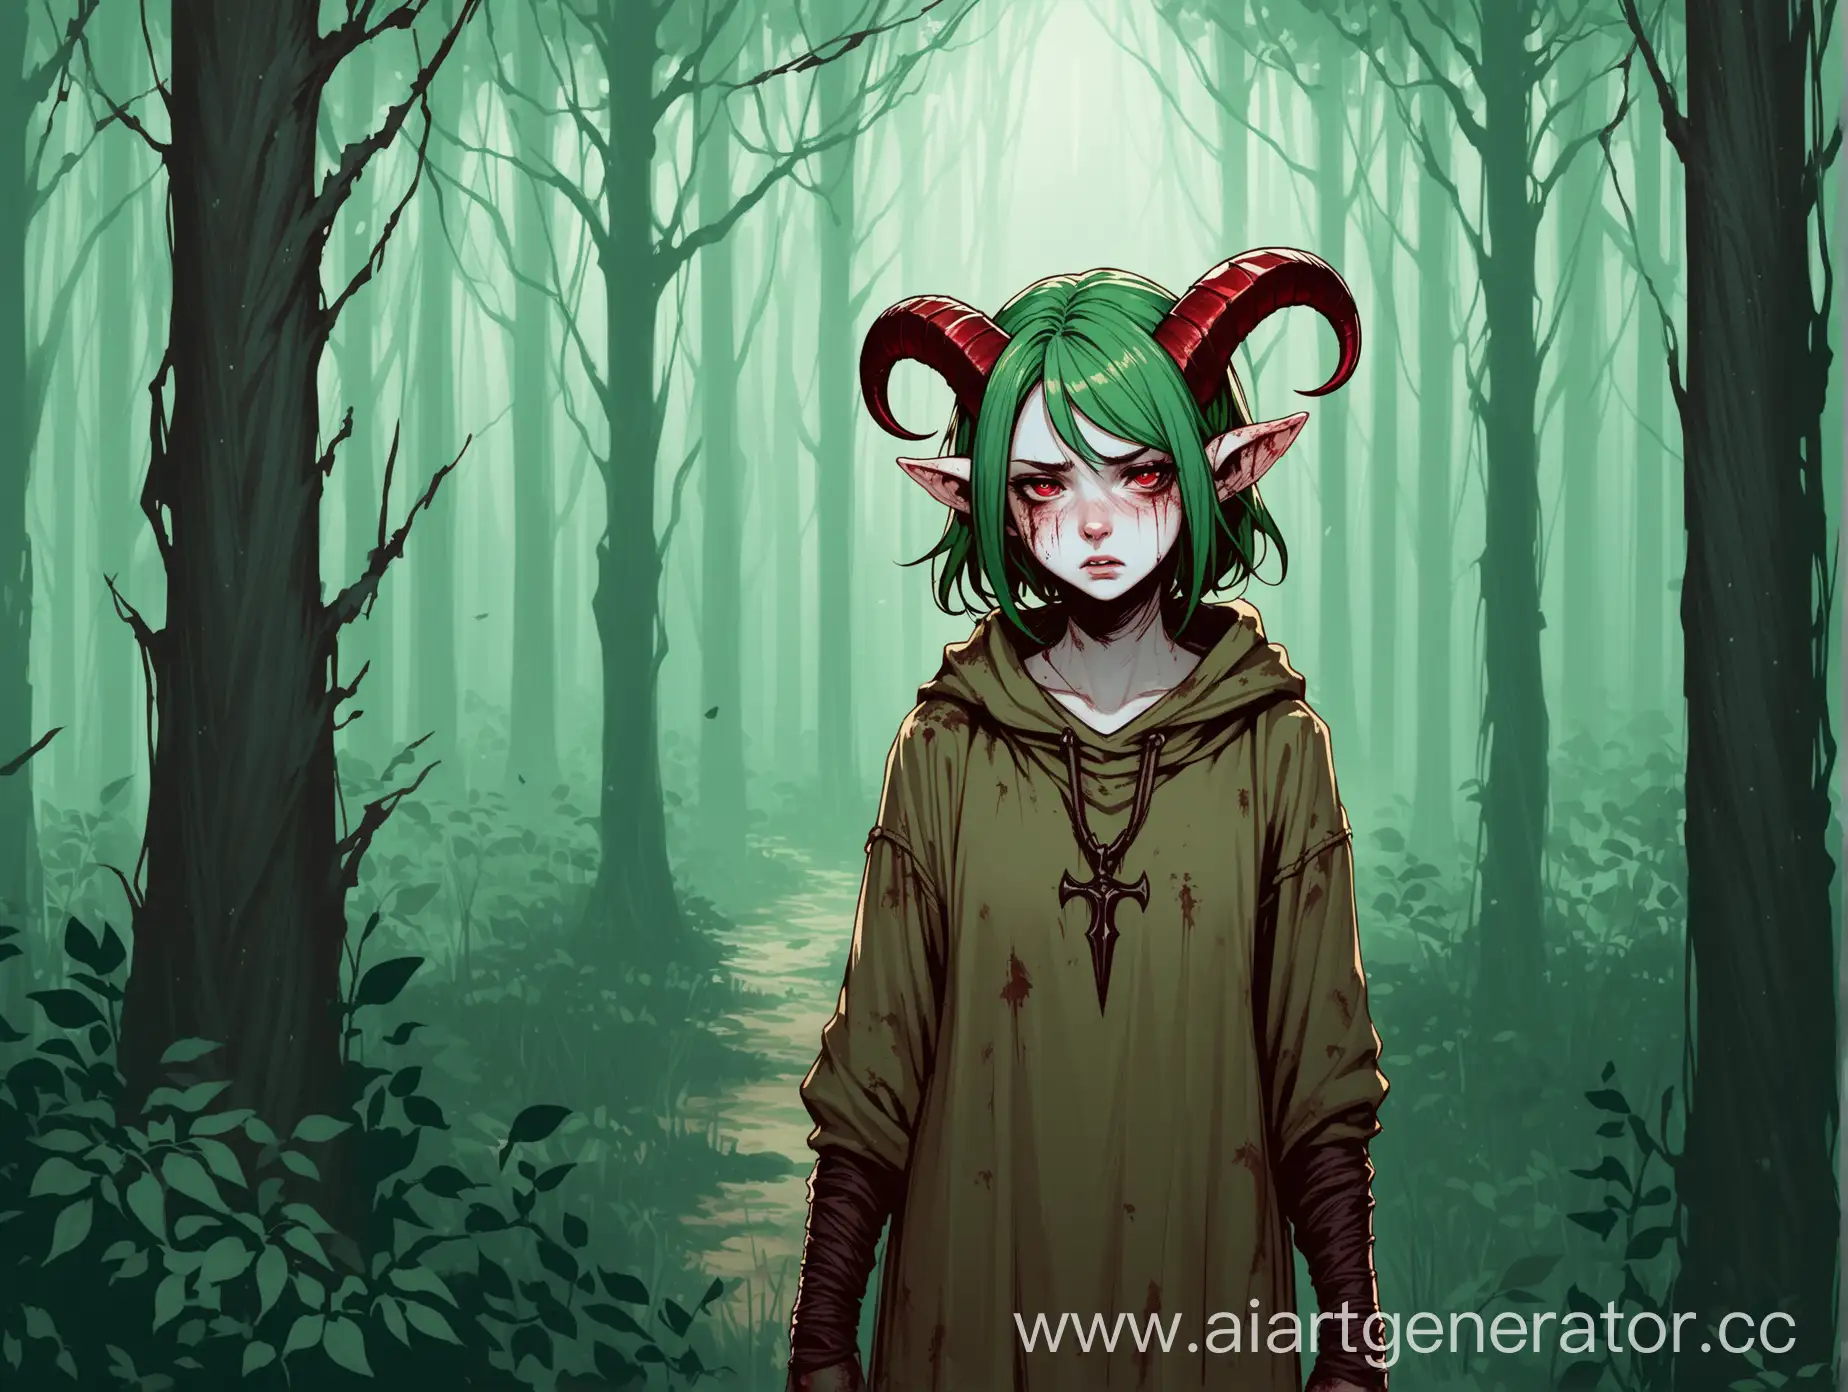 Fearful-Tiefling-Teenage-Slave-Girl-with-Dagger-in-Forest